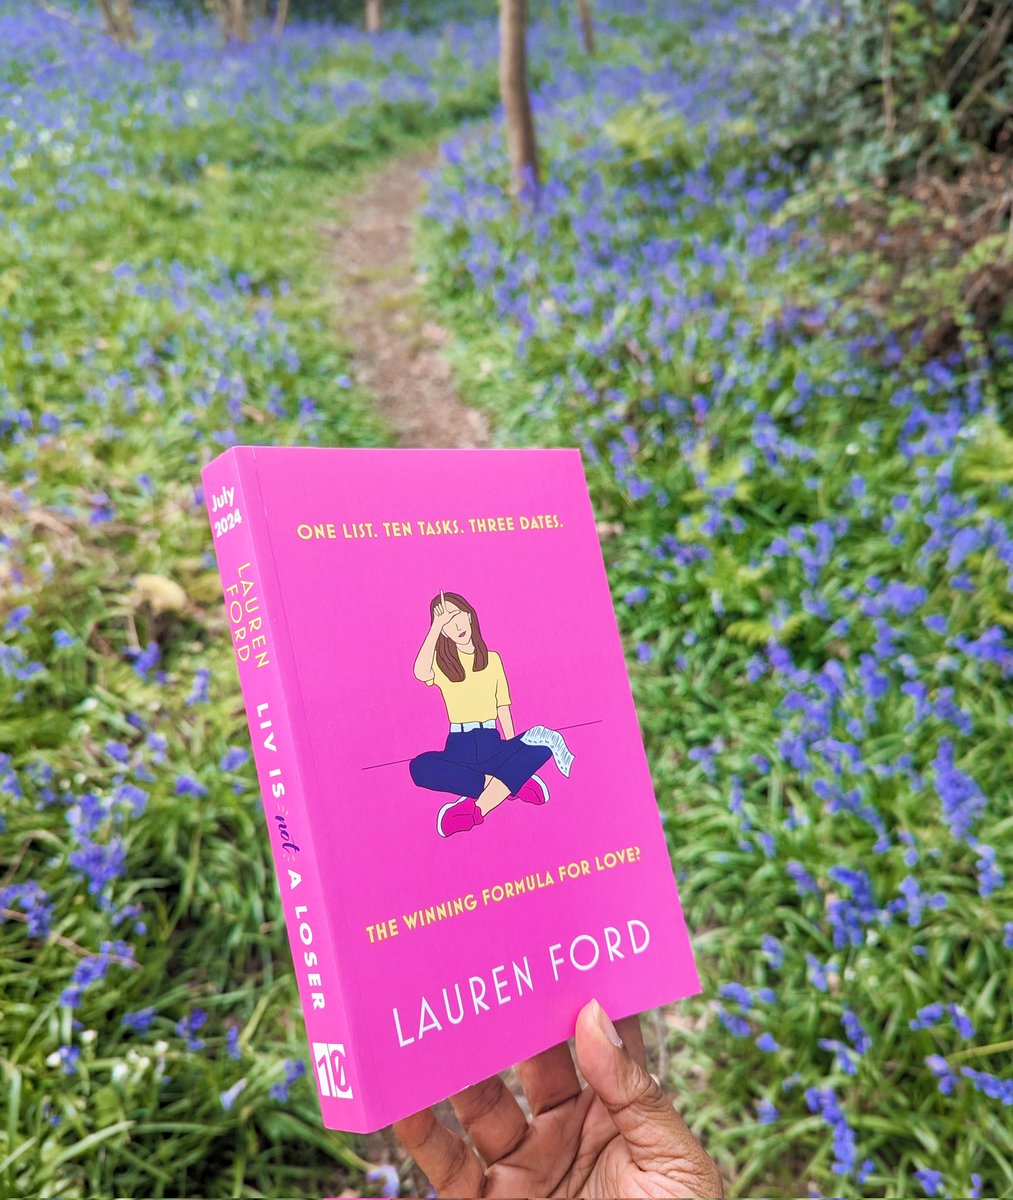 My thoughts on the delightful #LivIsNotALoser by @LaurenMFord are over on Instagram (link in bio!) #bookblogger #bookrec #bookstagram @ThanhmaiUK